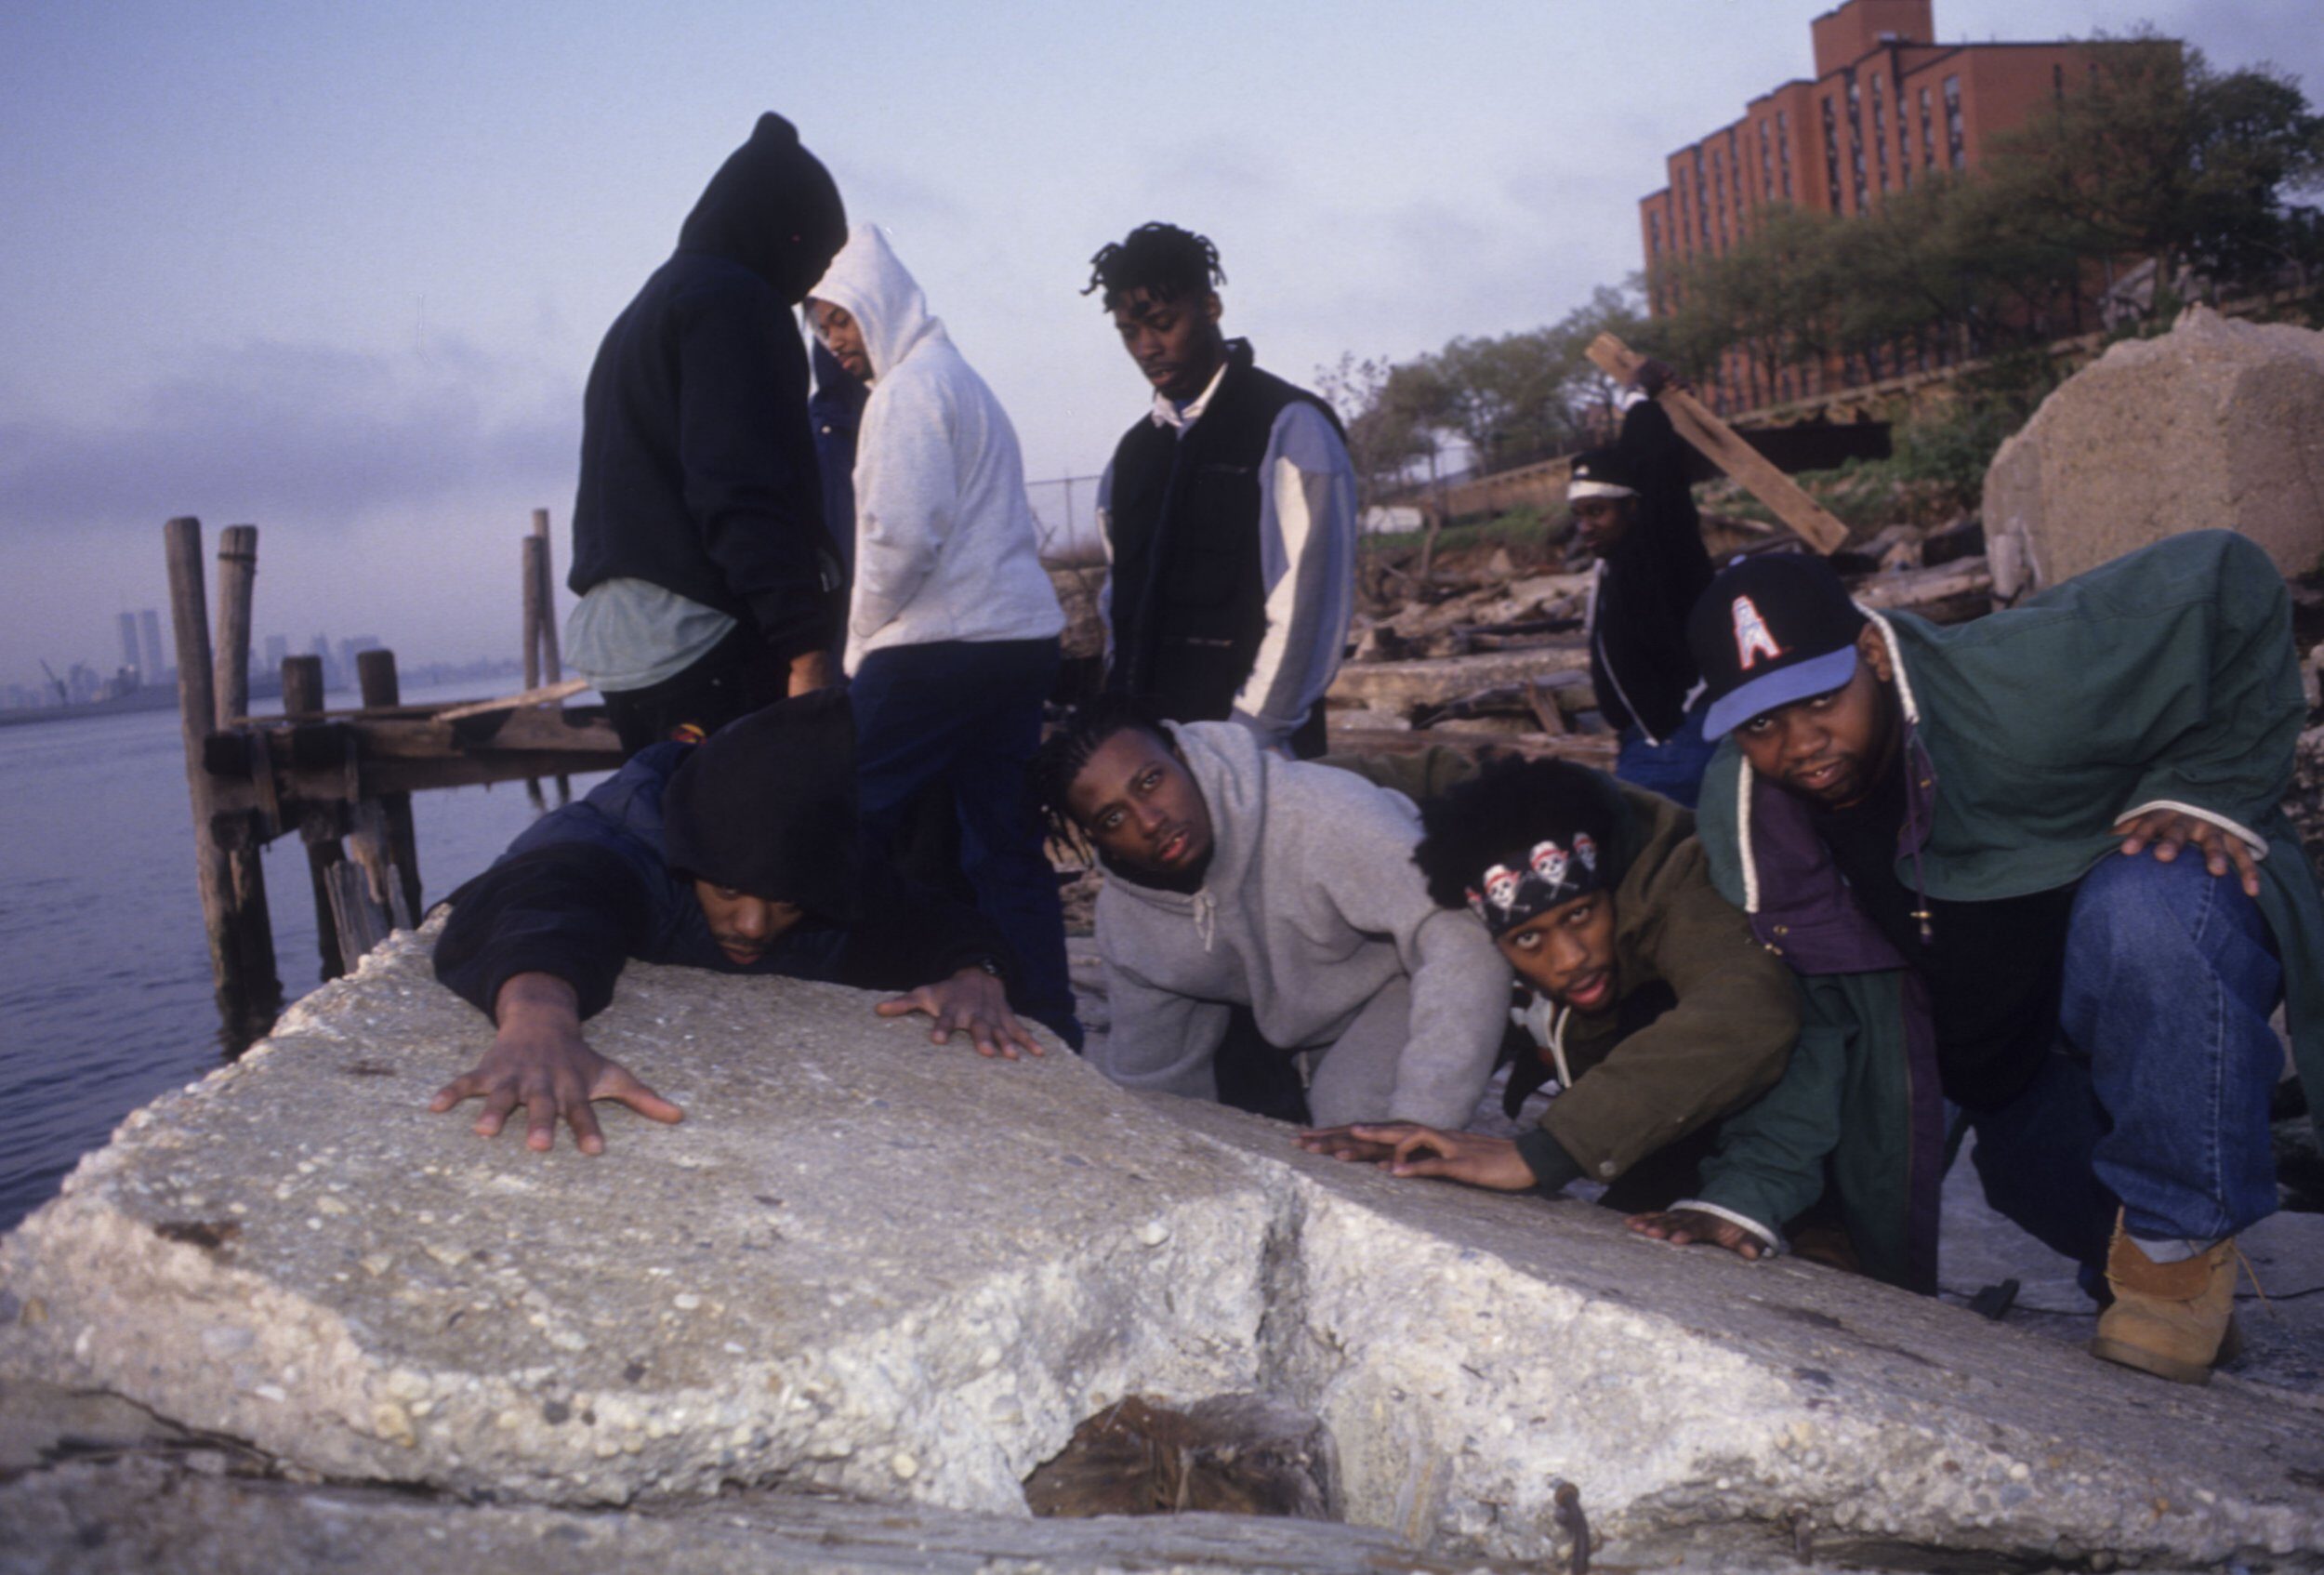 NEW YORK - MAY 8: Rap group Wu-Tang Clan poses for a portrait on May 8, 1993 on Staten Island in New York City, New York. (l to r:Method Man; GZA; Ol' Dirty Bastard; RZA; Raekwon). (Photo by Al Pereira/Michael Ochs Archives/Getty Images)